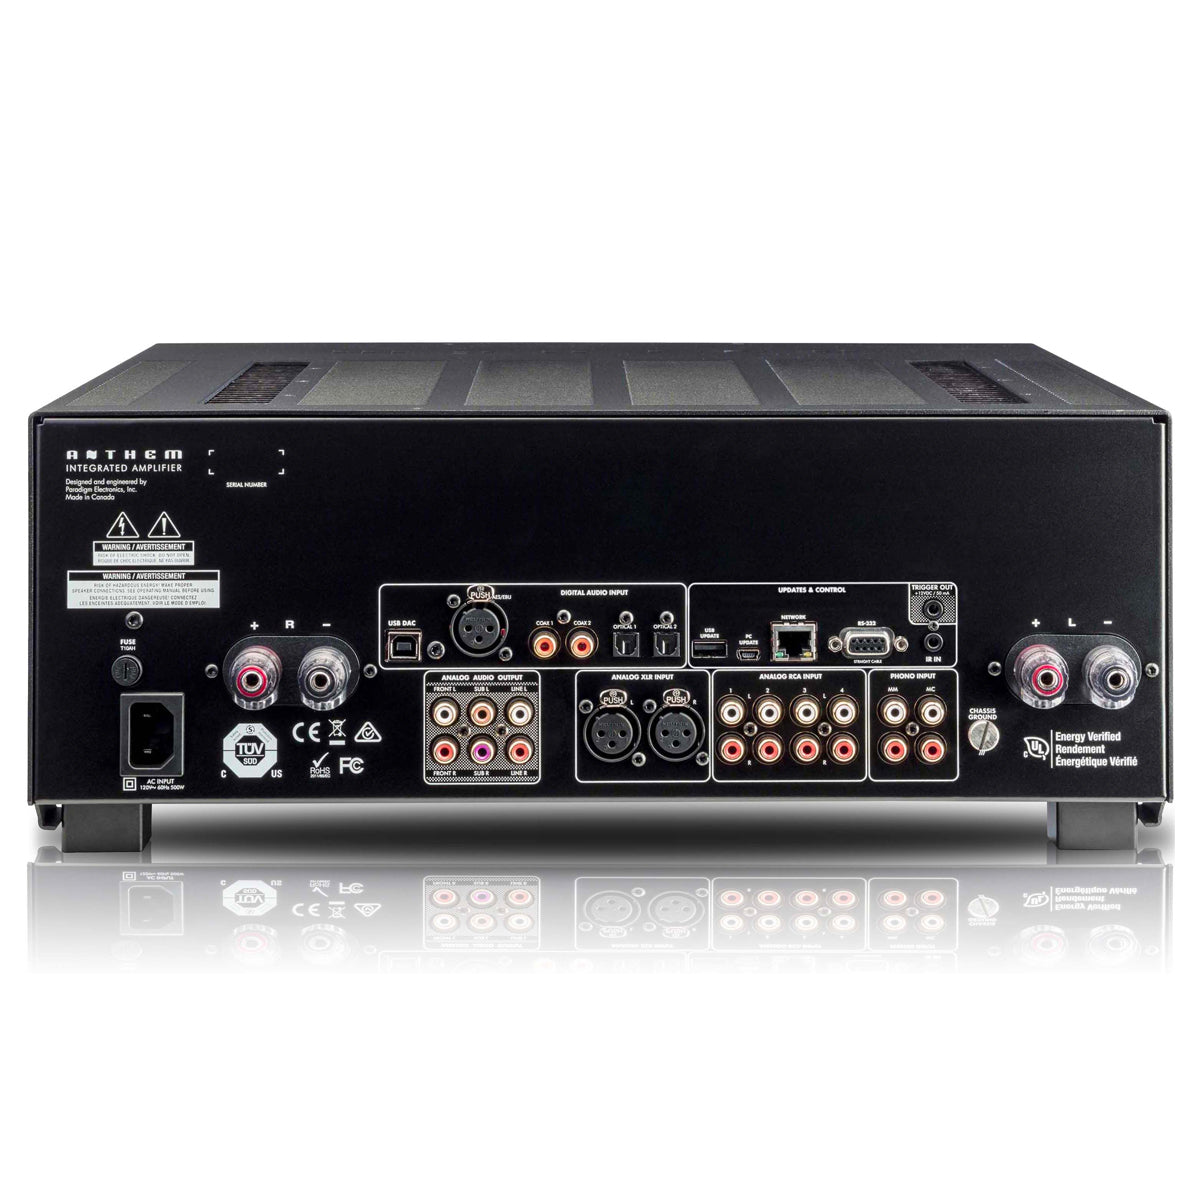 Anthem STR Integrated Amplifier - Black - The Audio Experts